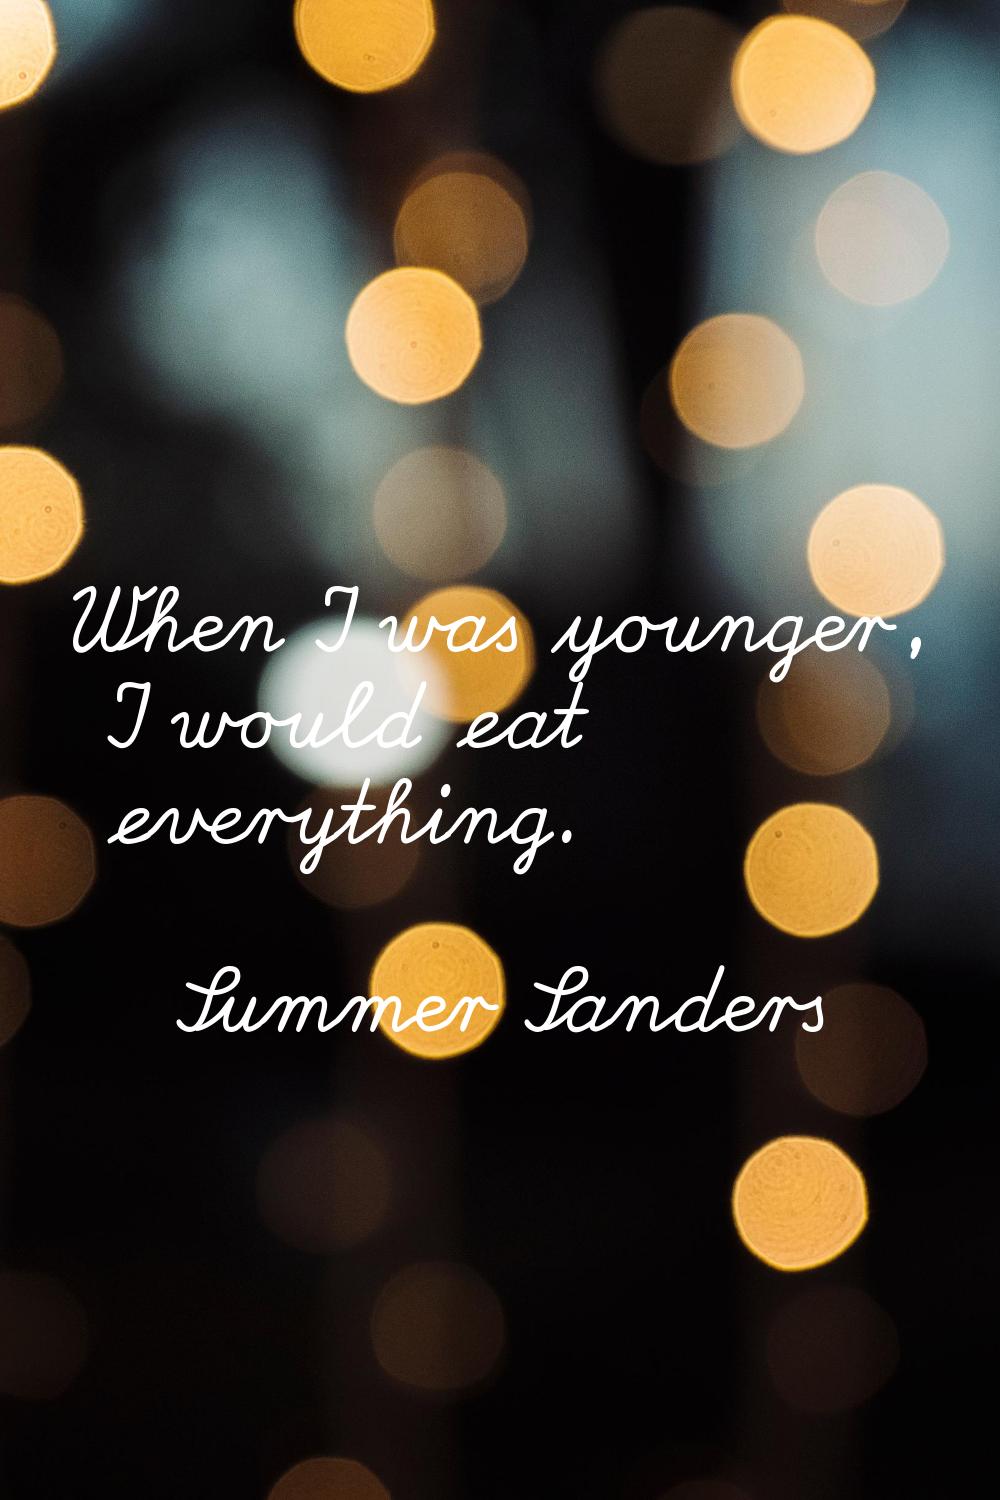 When I was younger, I would eat everything.